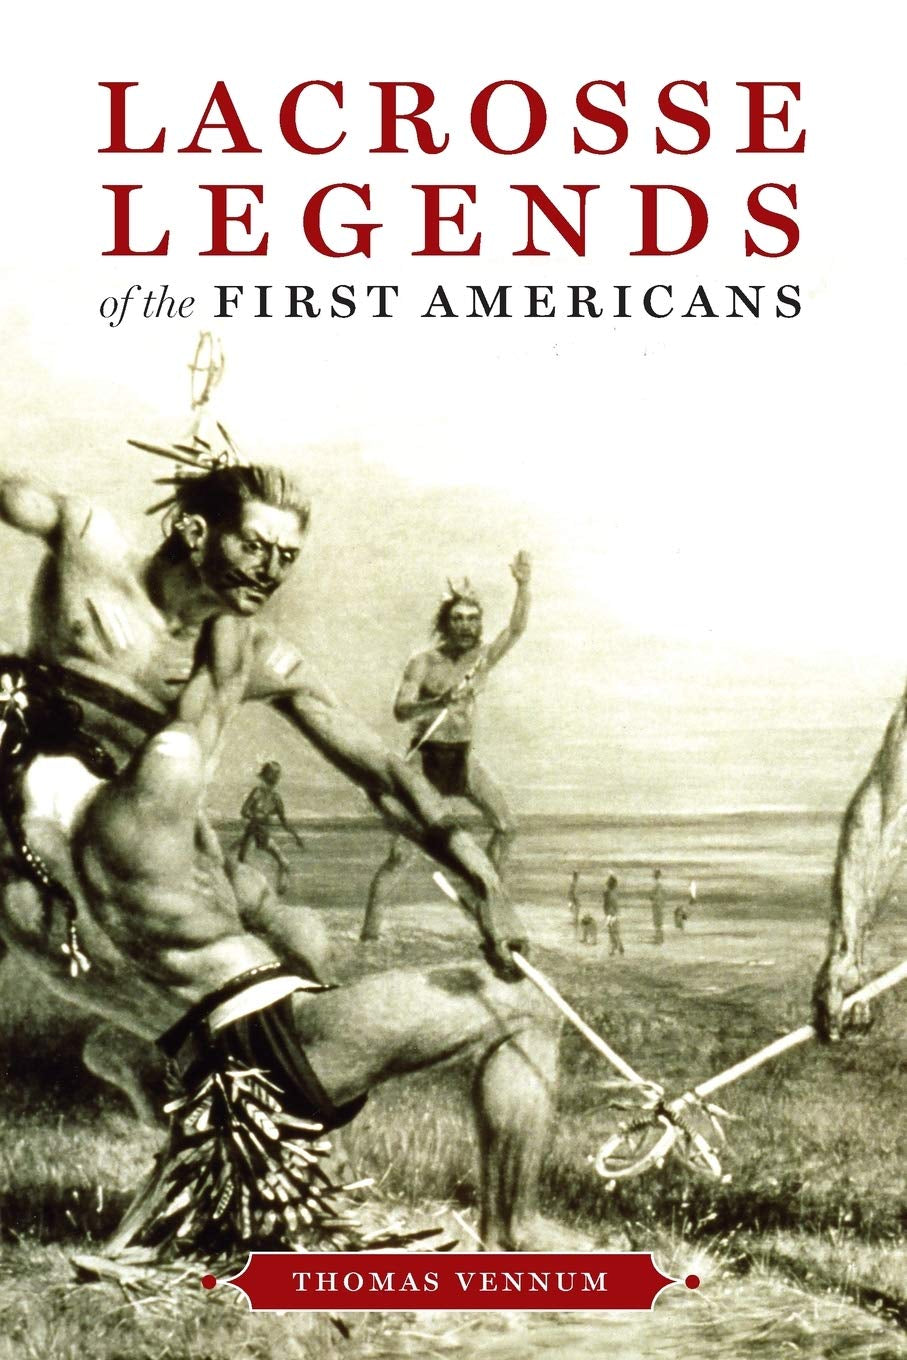 Lacrosse Legends of the First Americans by Thomas Vennum  - Front 